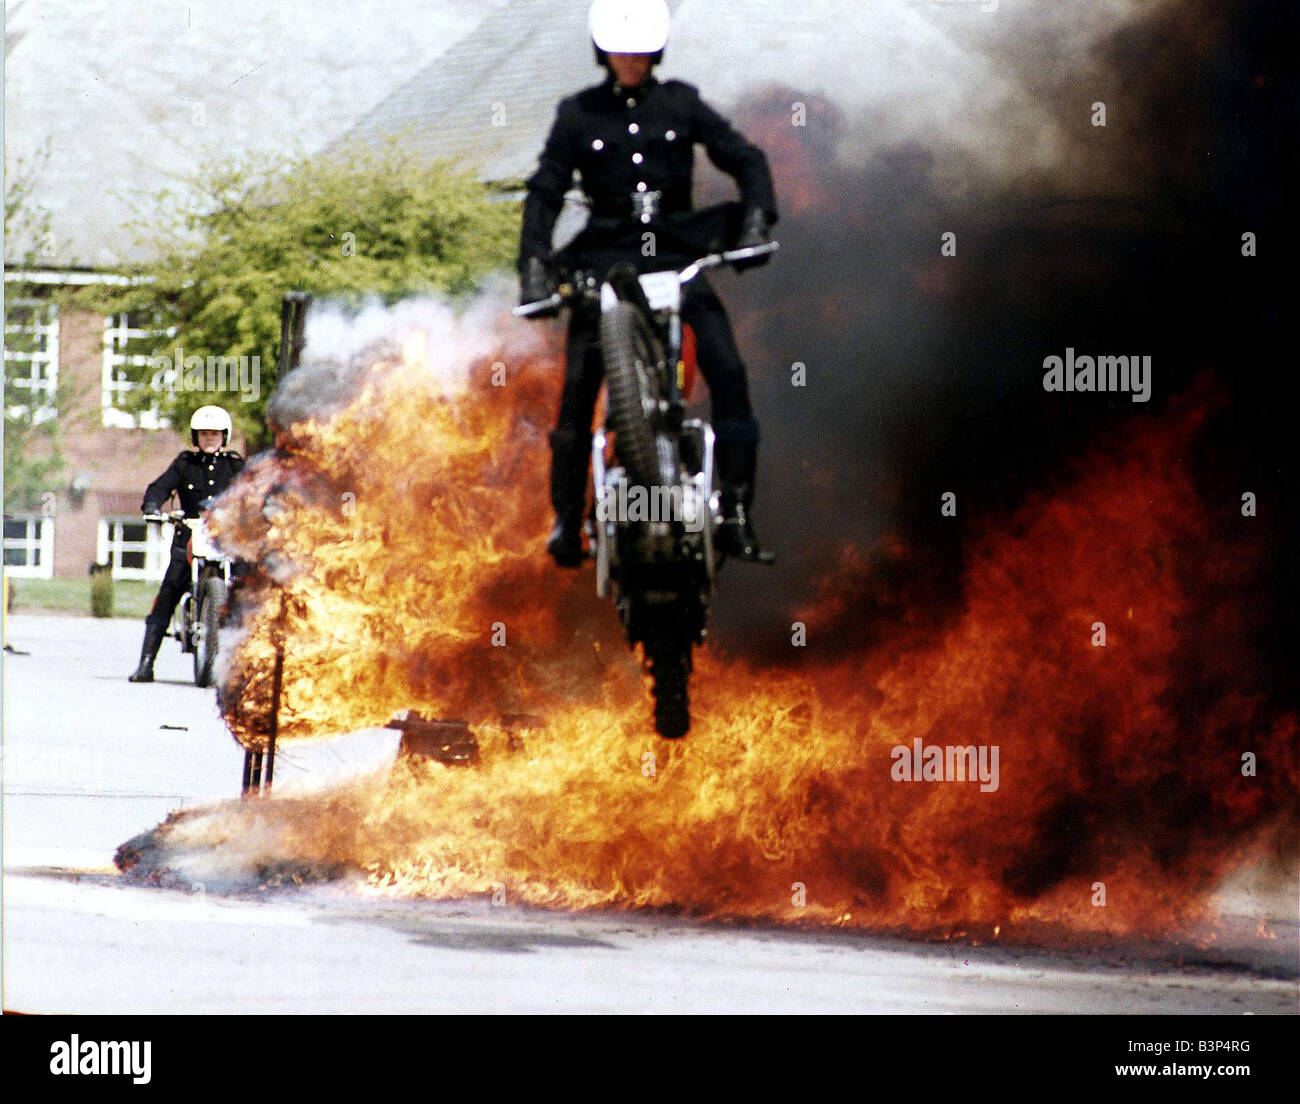 Army Regiments Royal signals White Helmets Display motarcycle team  performing tricks Stock Photo - Alamy